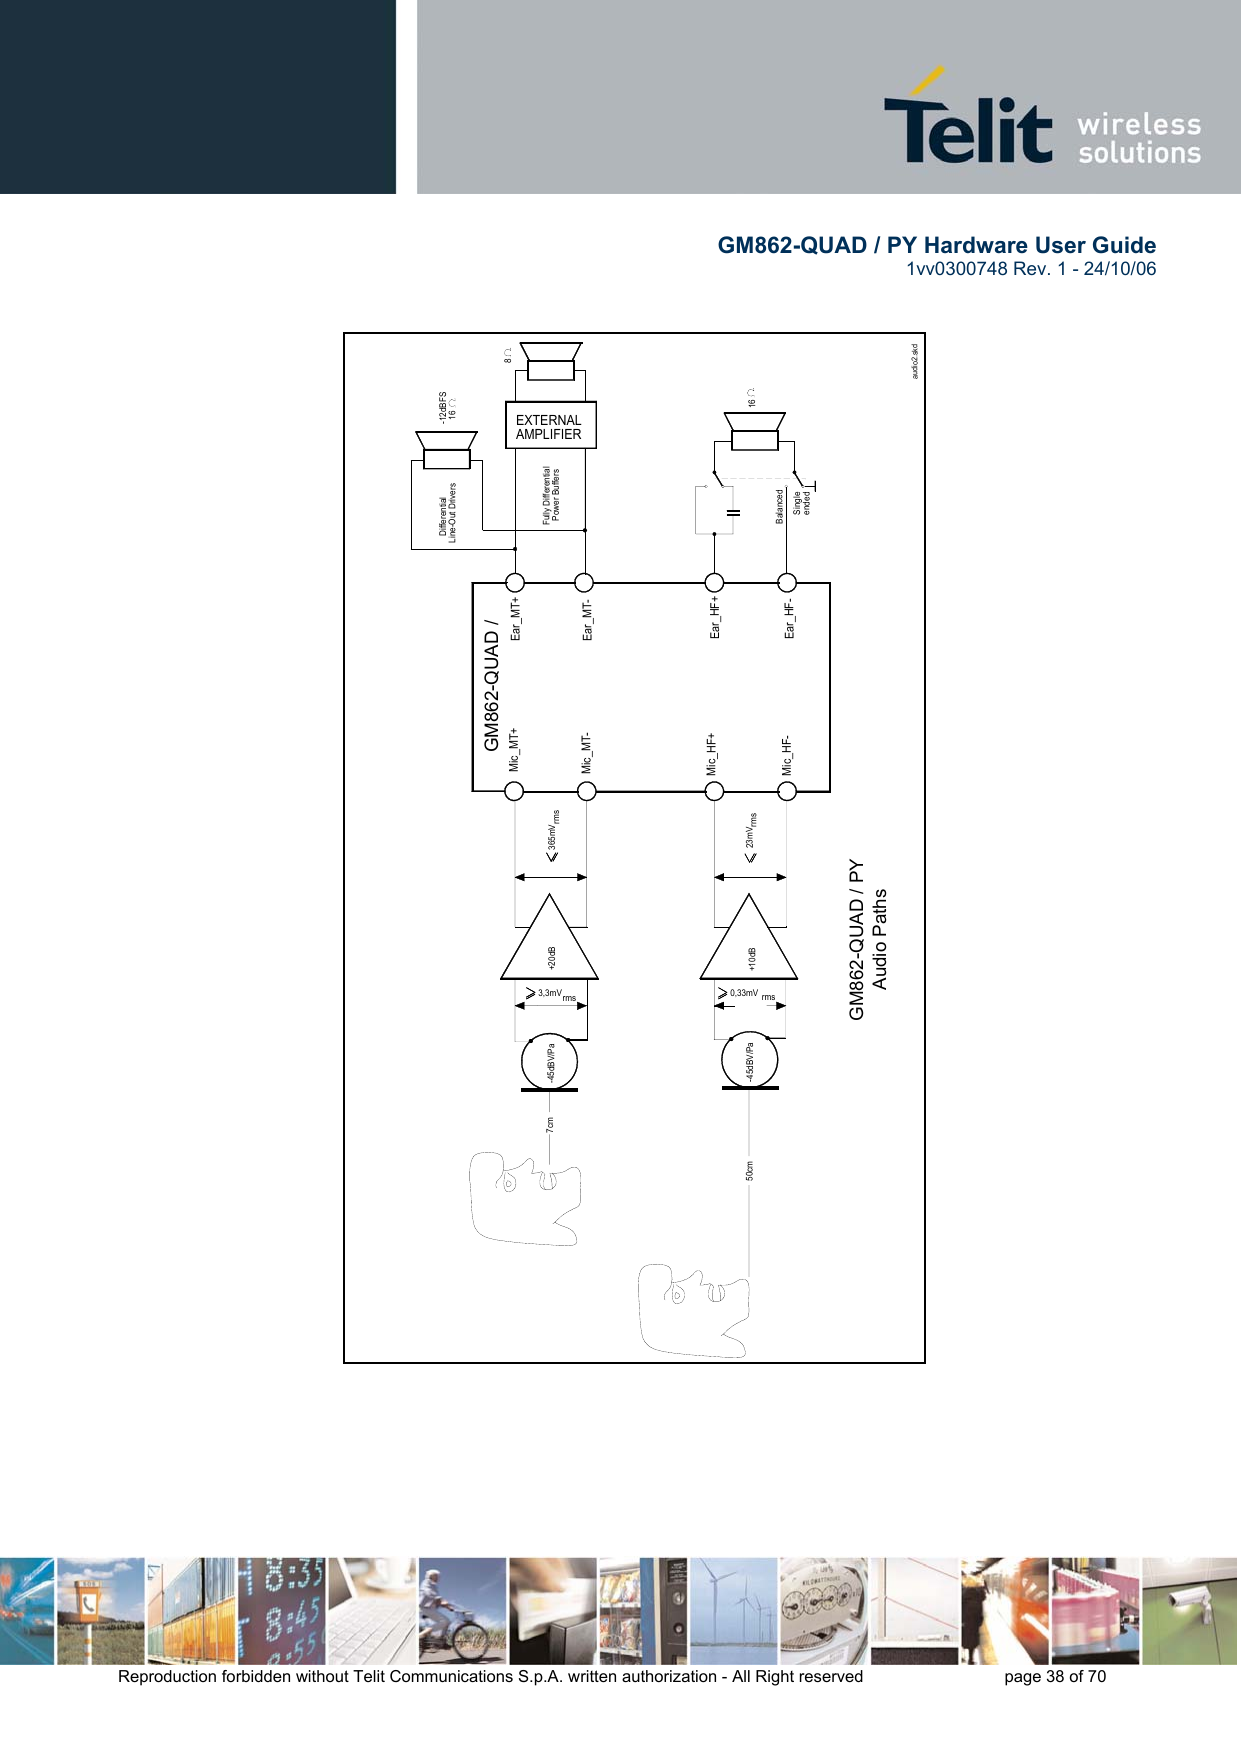        GM862-QUAD / PY Hardware User Guide   1vv0300748 Rev. 1 - 24/10/06    Reproduction forbidden without Telit Communications S.p.A. written authorization - All Right reserved    page 38 of 70    GE863-GPS Audio Paths   Differential Line-Out Drivers Fully Differential  Power Buffers EXTERNALAMPLIFIER-12dBFS  16816+10dB-45dBV/PaMic_HF-Ear_HF-BalancedSingle endedMic_HF+Ear_HF+50cm23mVrms0,33mV rmsaudio2.skdGM863-GPS+20dB7cm-45dBV/Pa3,3mVrms365mVrmsMic_MT+Ear_MT+Mic_MT-Ear_MT- GM862-QUAD / GM862-QUAD / PY Audio Paths 